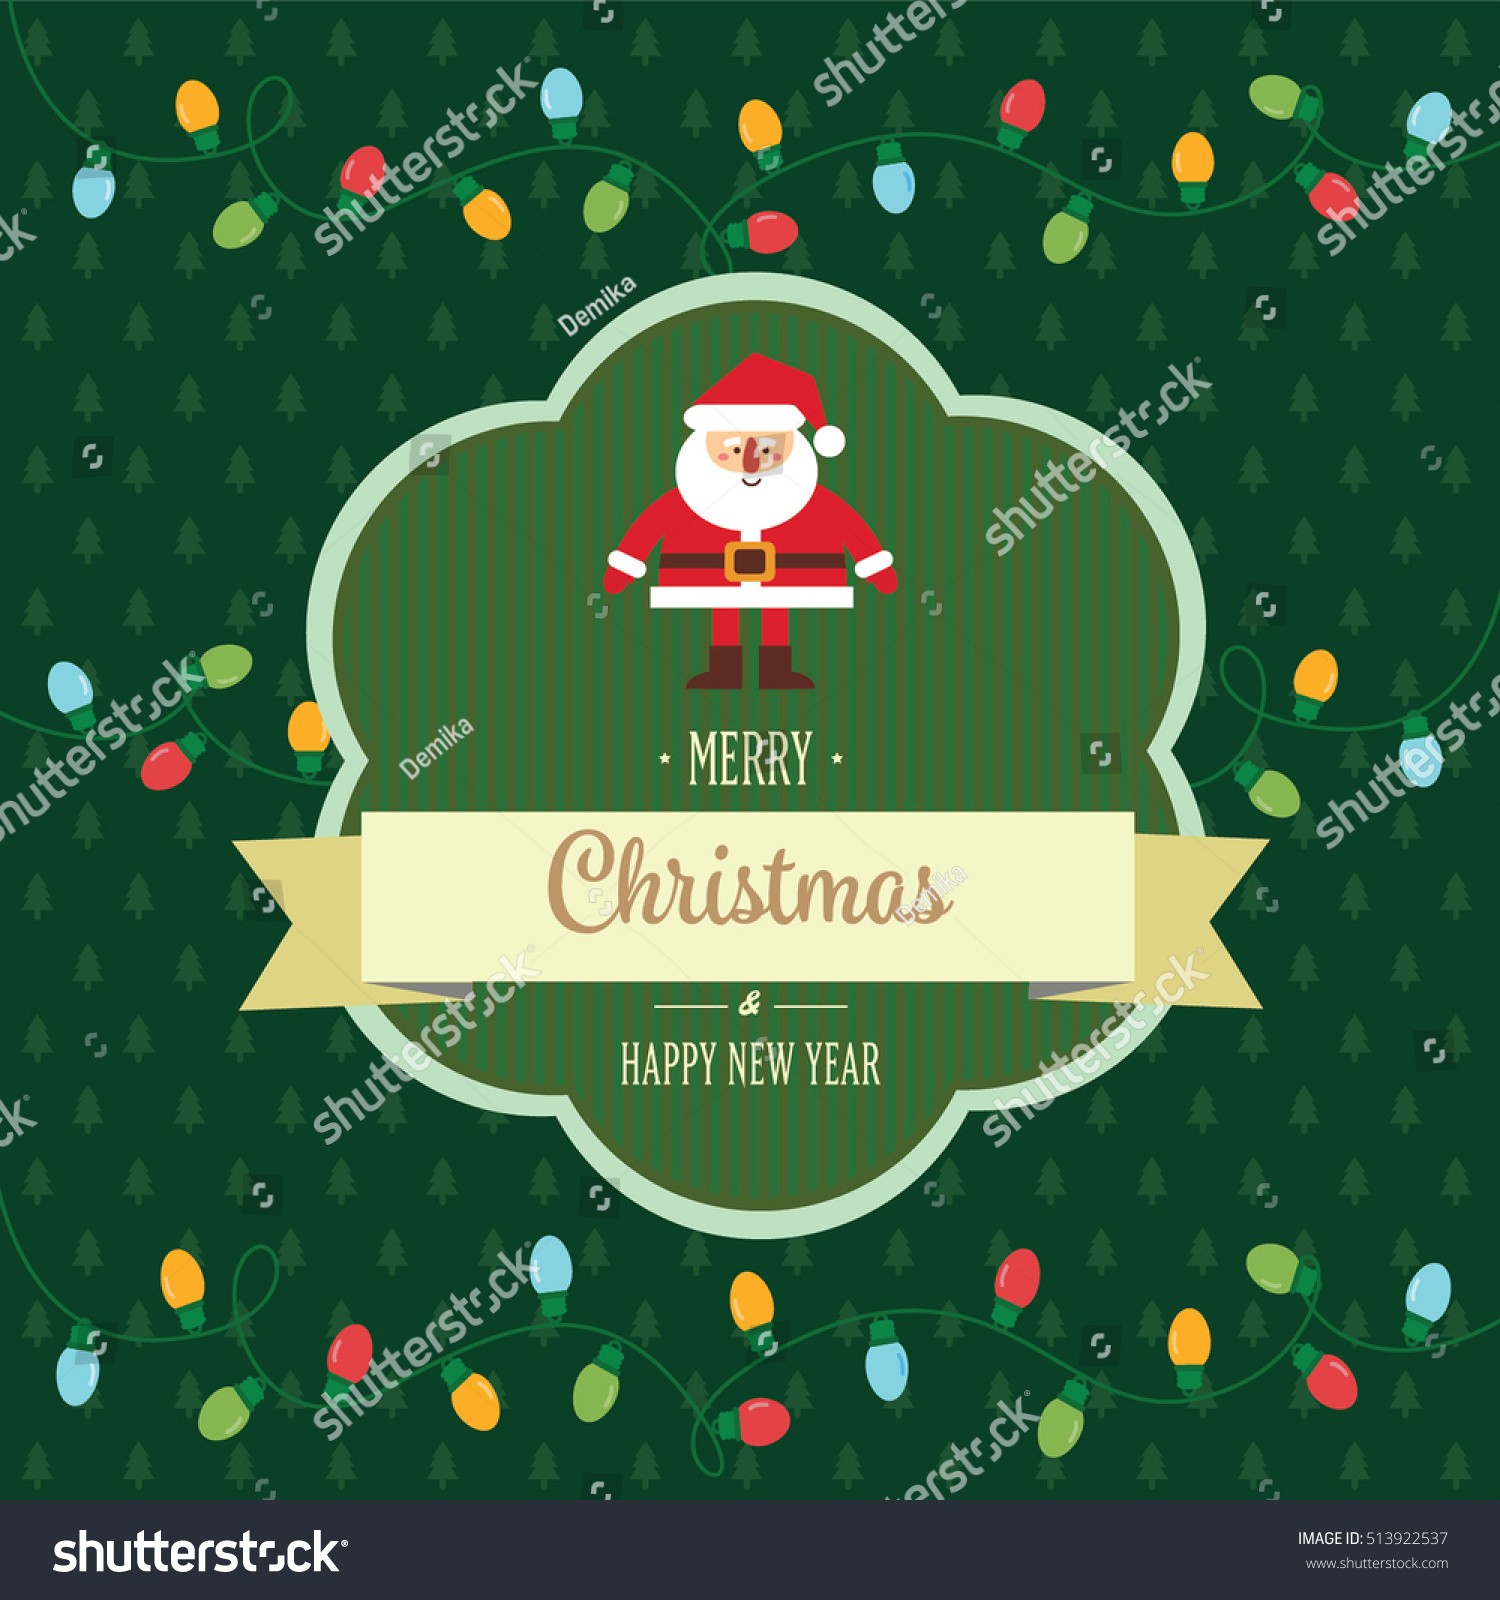 Vector illustration Christmas vintage postcard in retro style with label merry Christmas and Happy New year